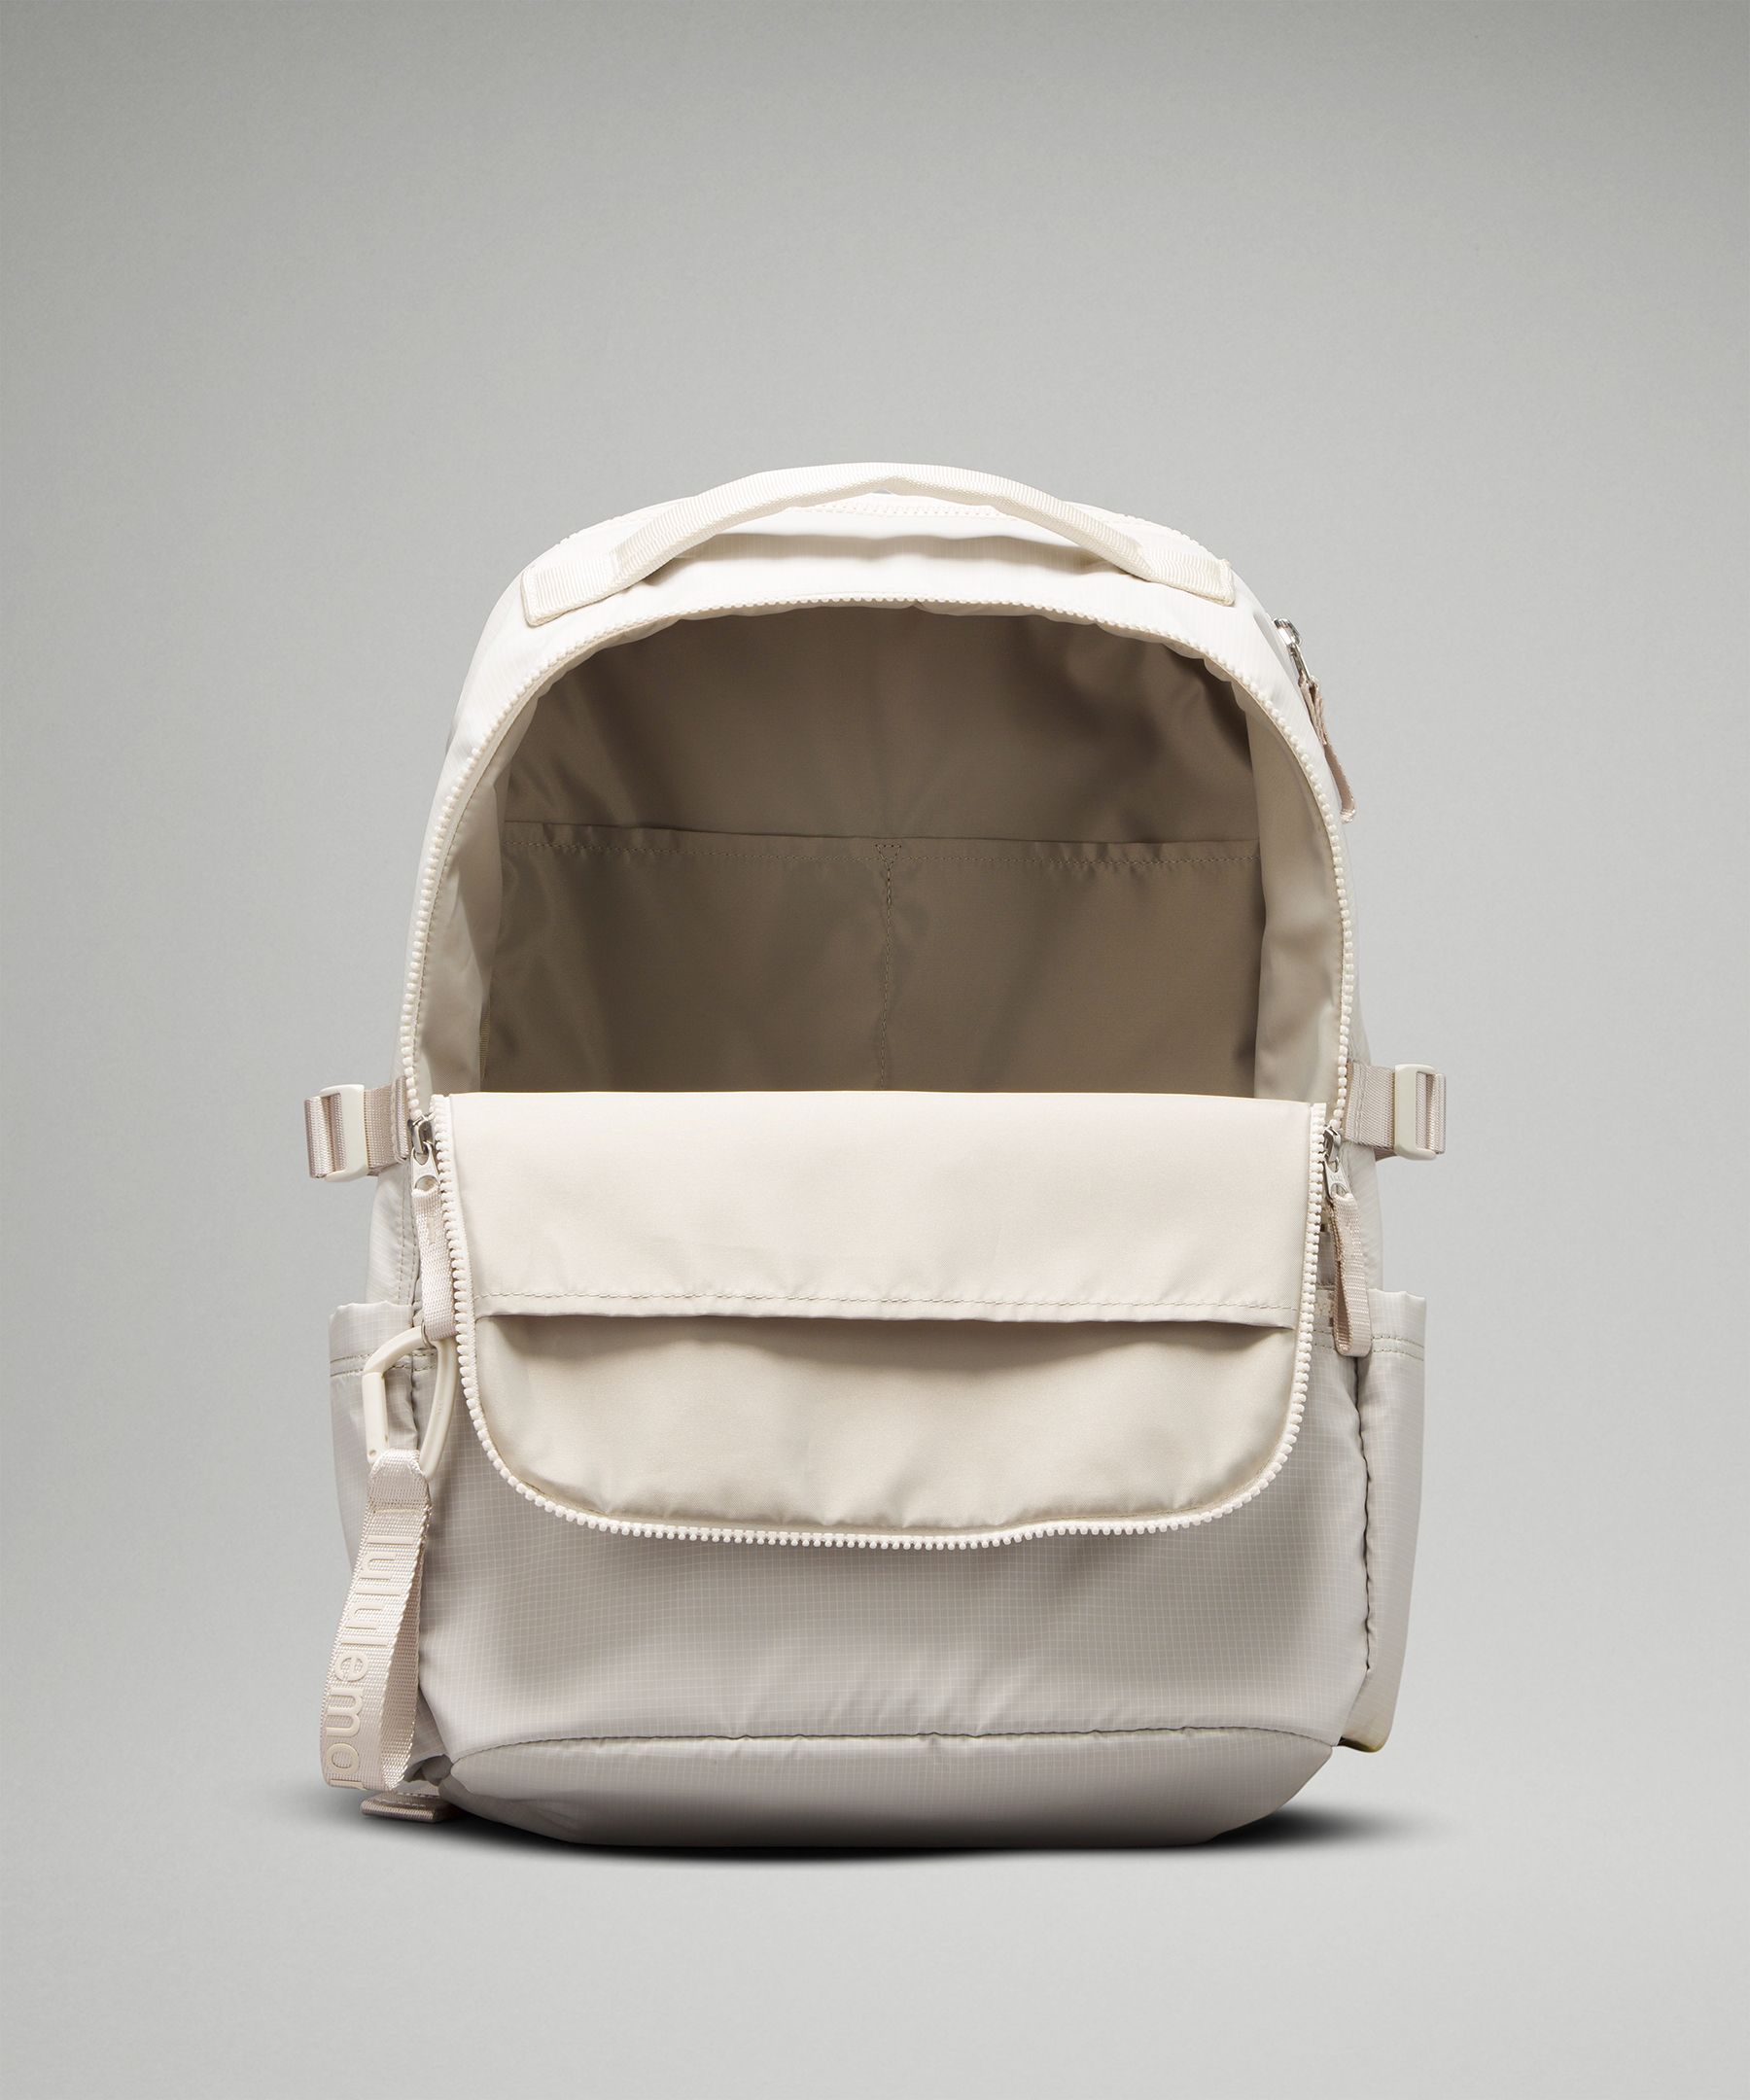 Shop Lululemon Backpack With Laptop Compartment - New Crew 22l